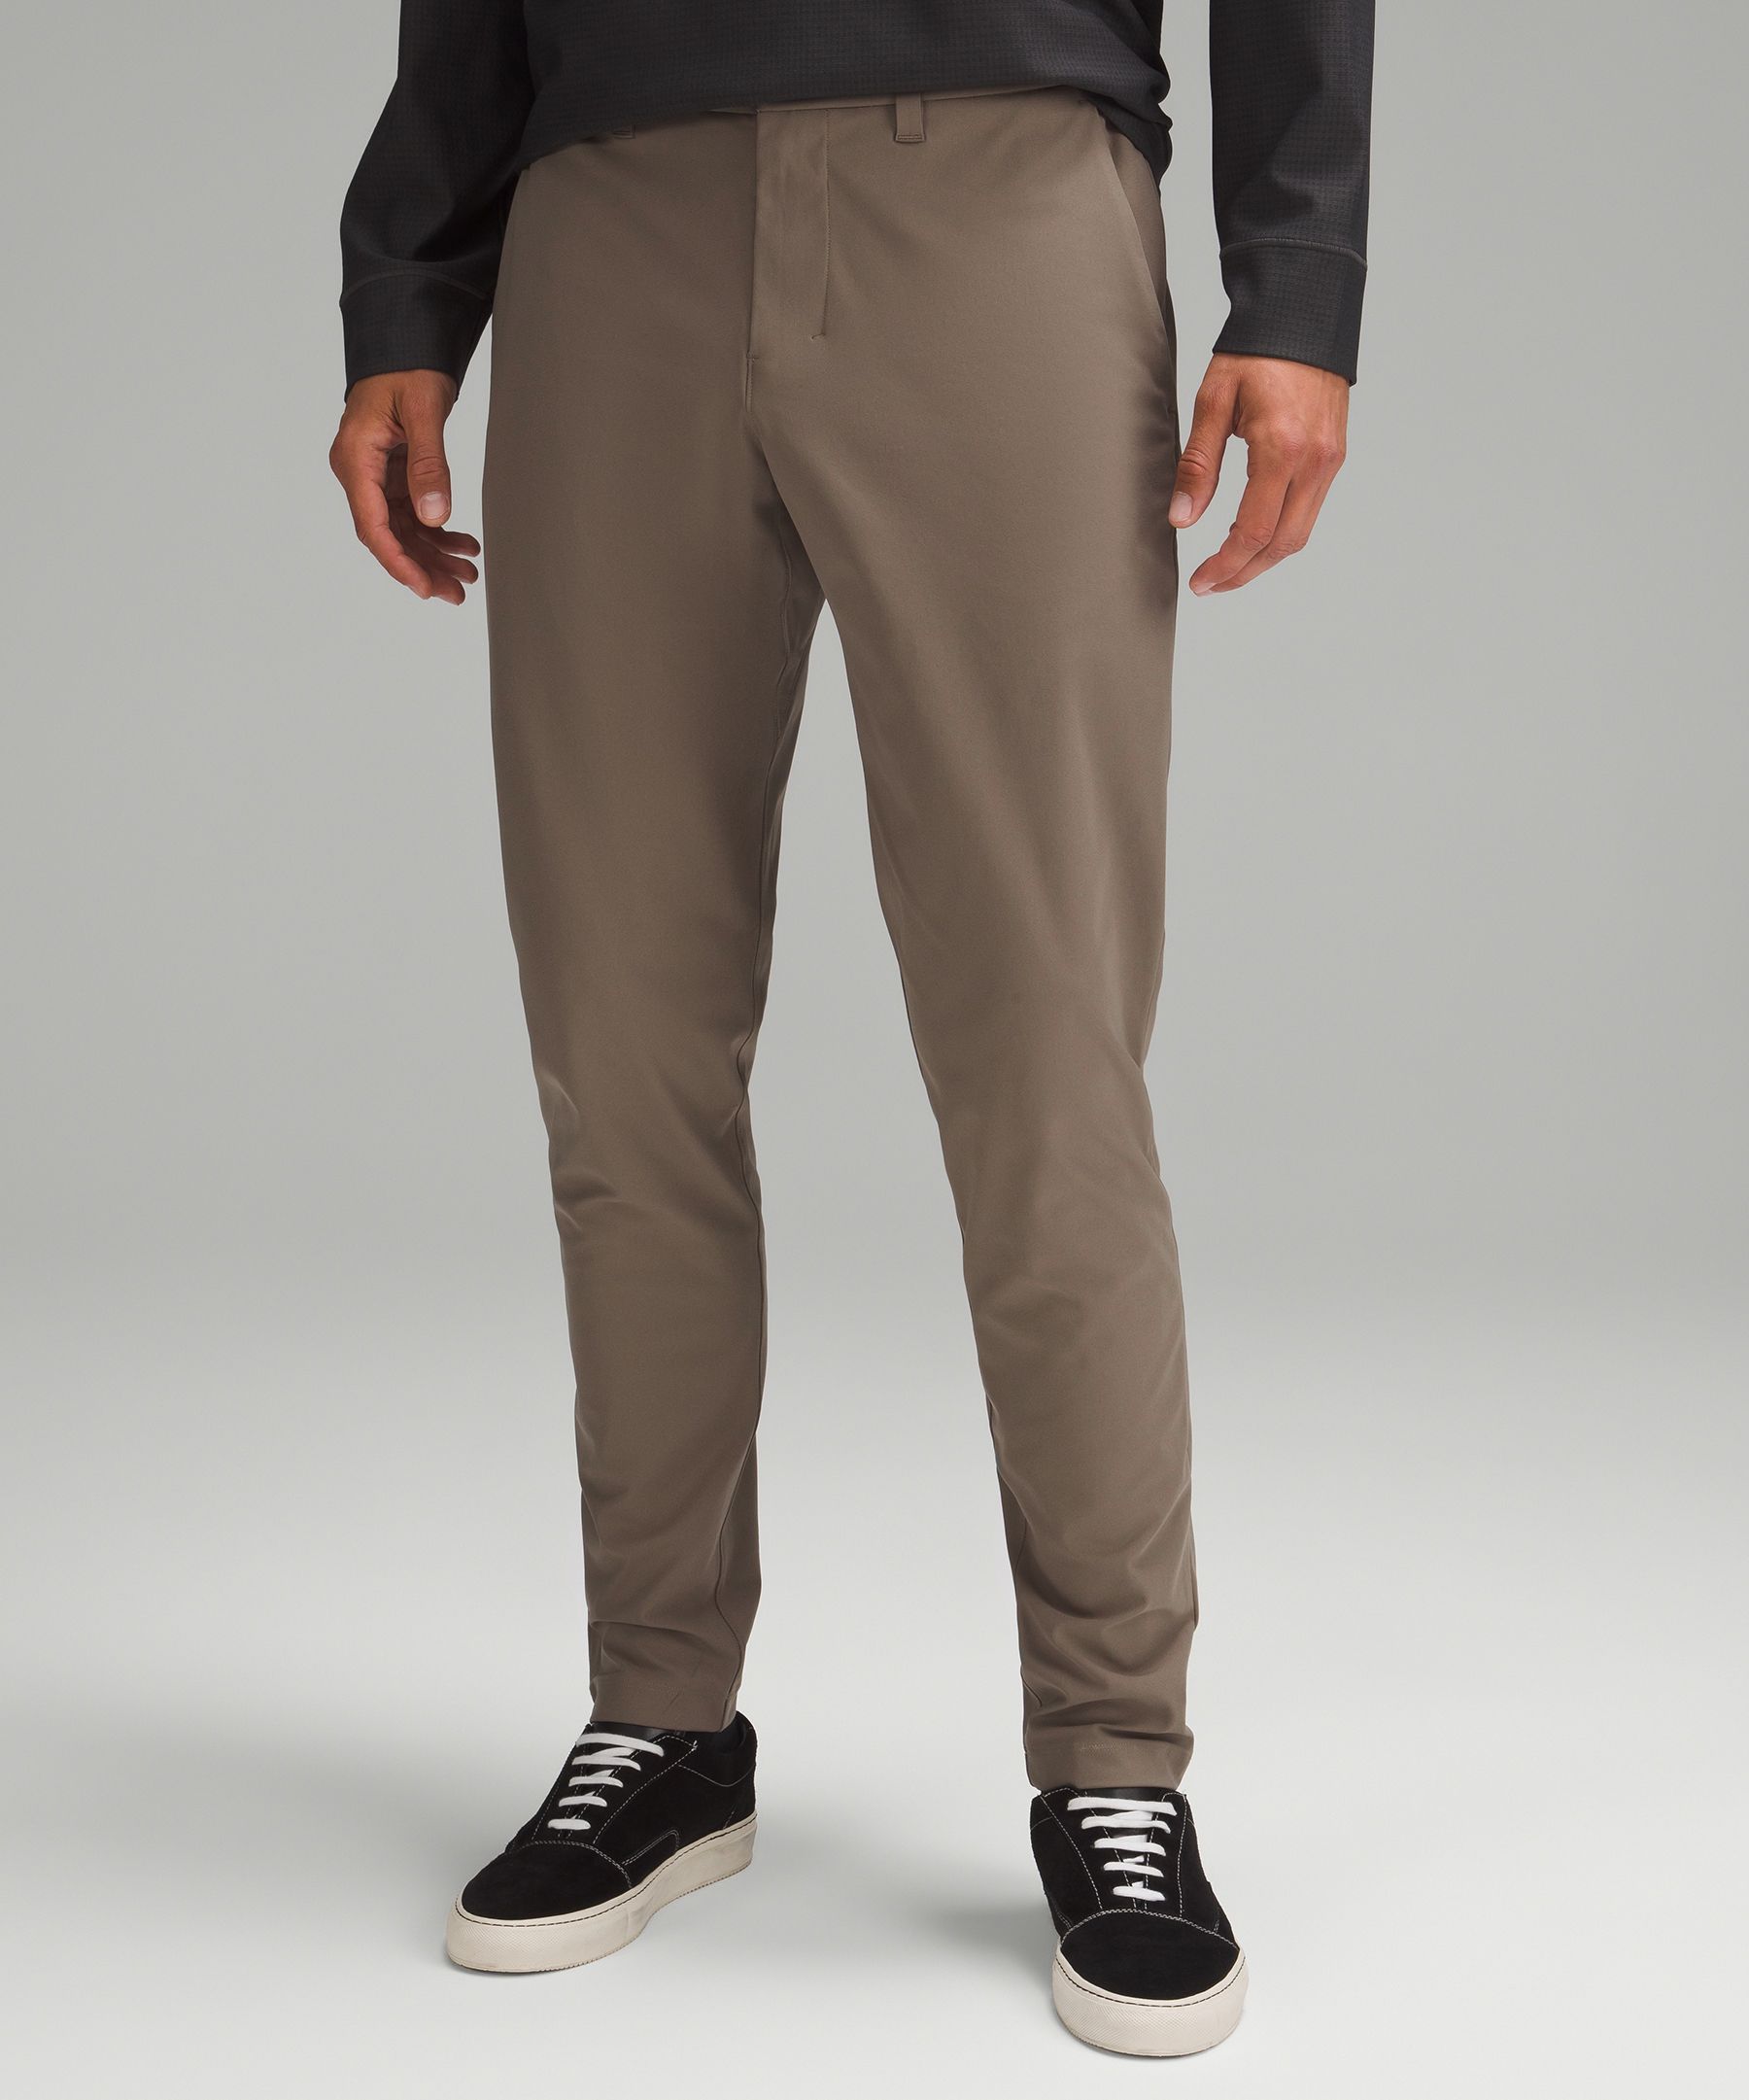 Lululemon Commission Pant Relaxed 34 *Warpstreme - Trench (First Release)  - lulu fanatics